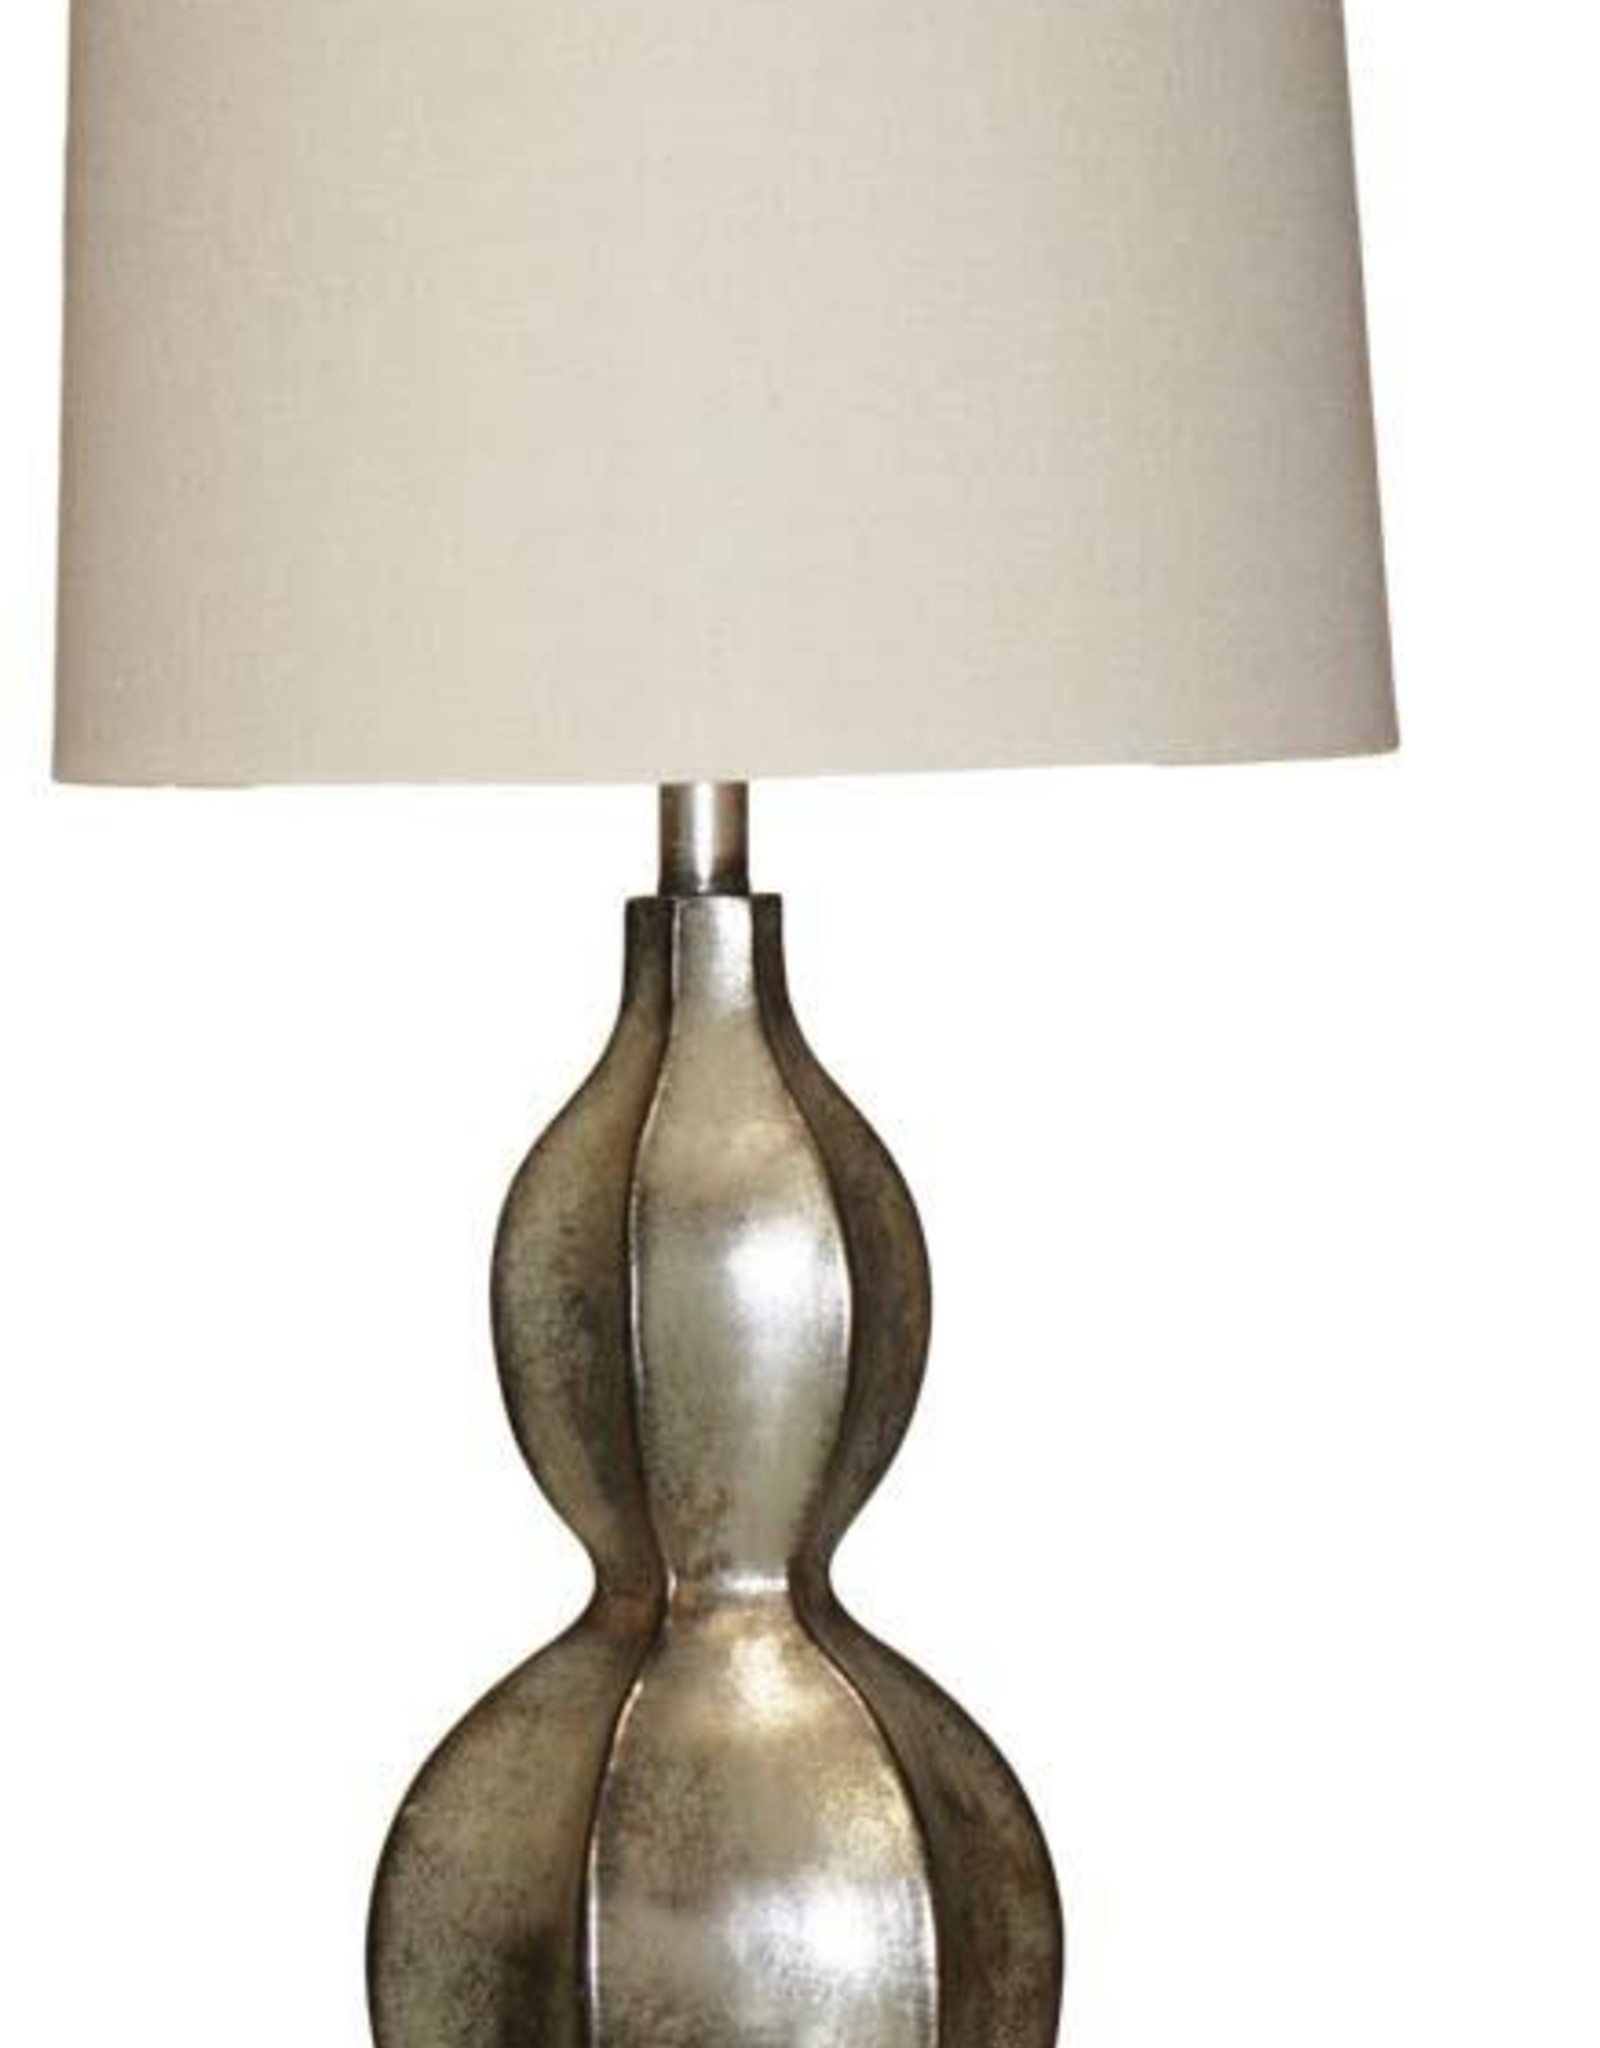 H&H 1811 Tarnished Silver Lamp